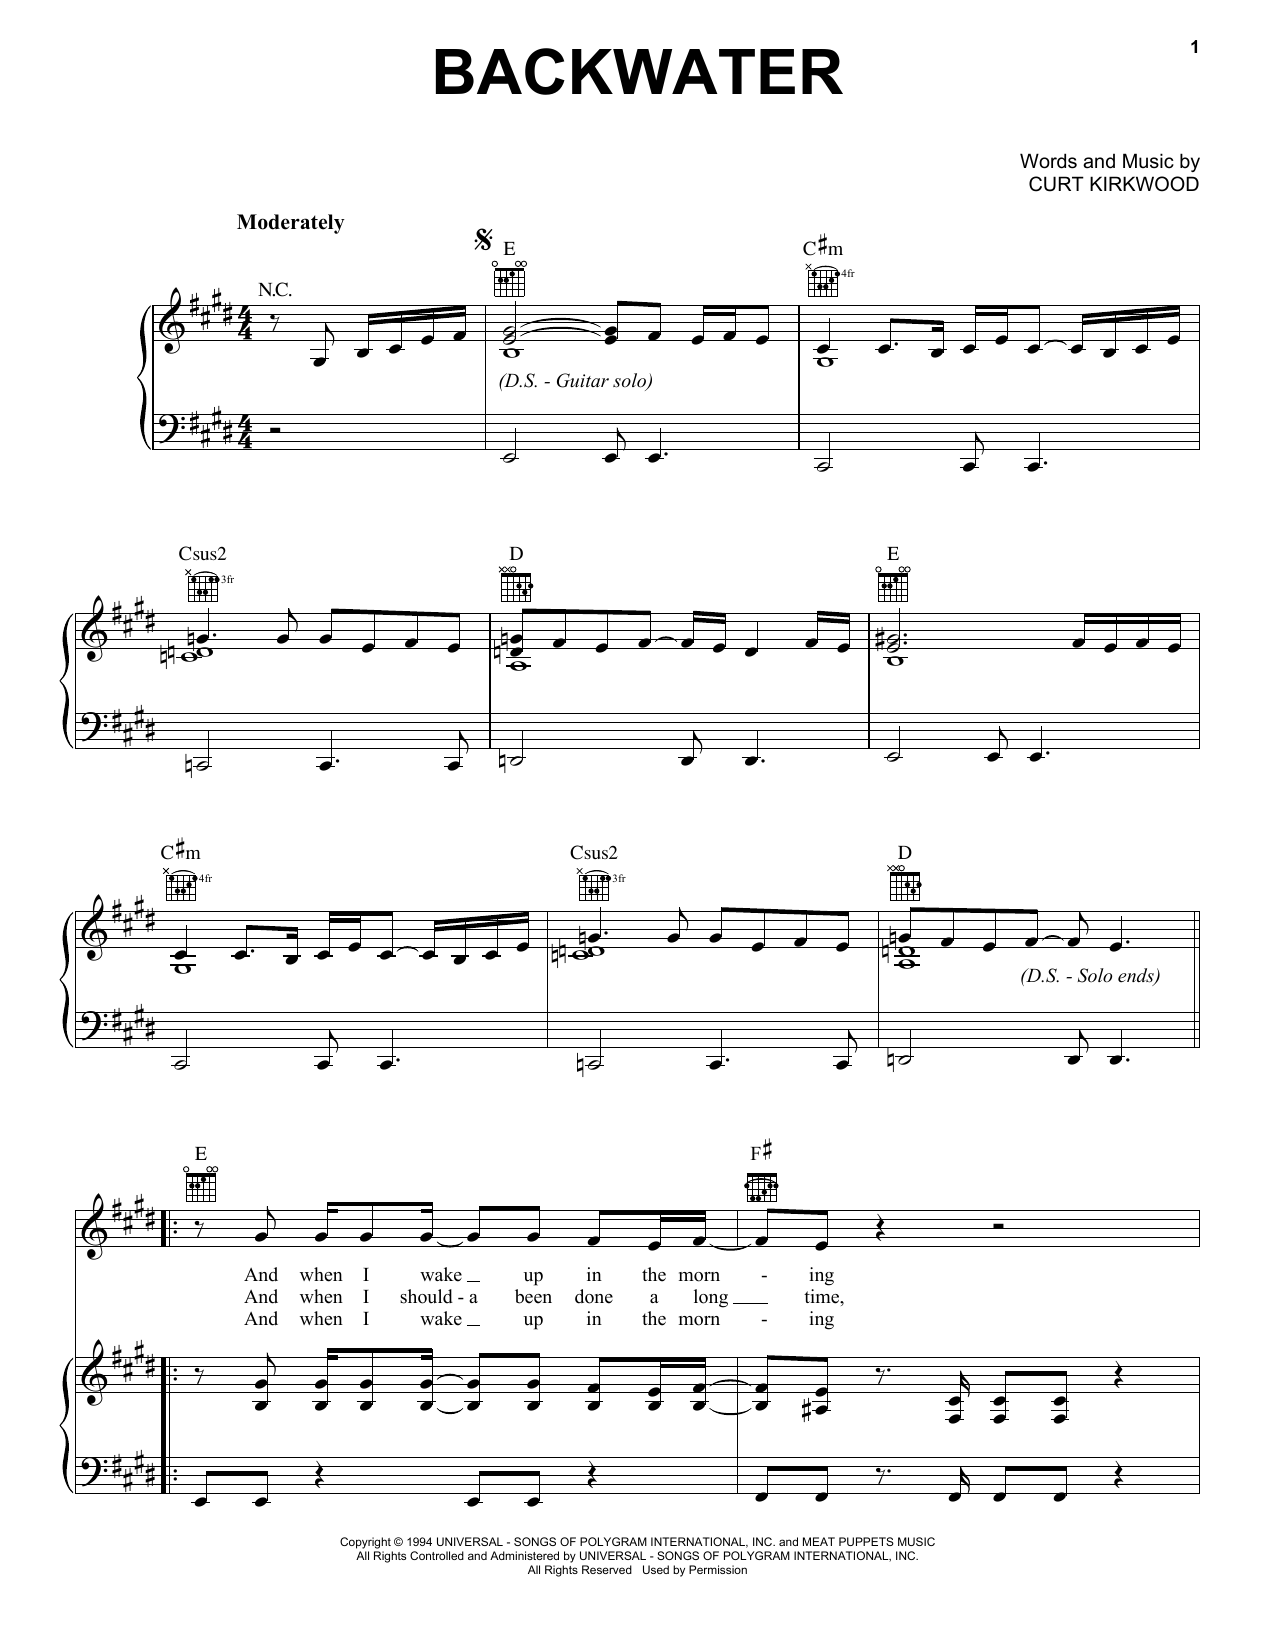 Meat Puppets Backwater sheet music notes printable PDF score